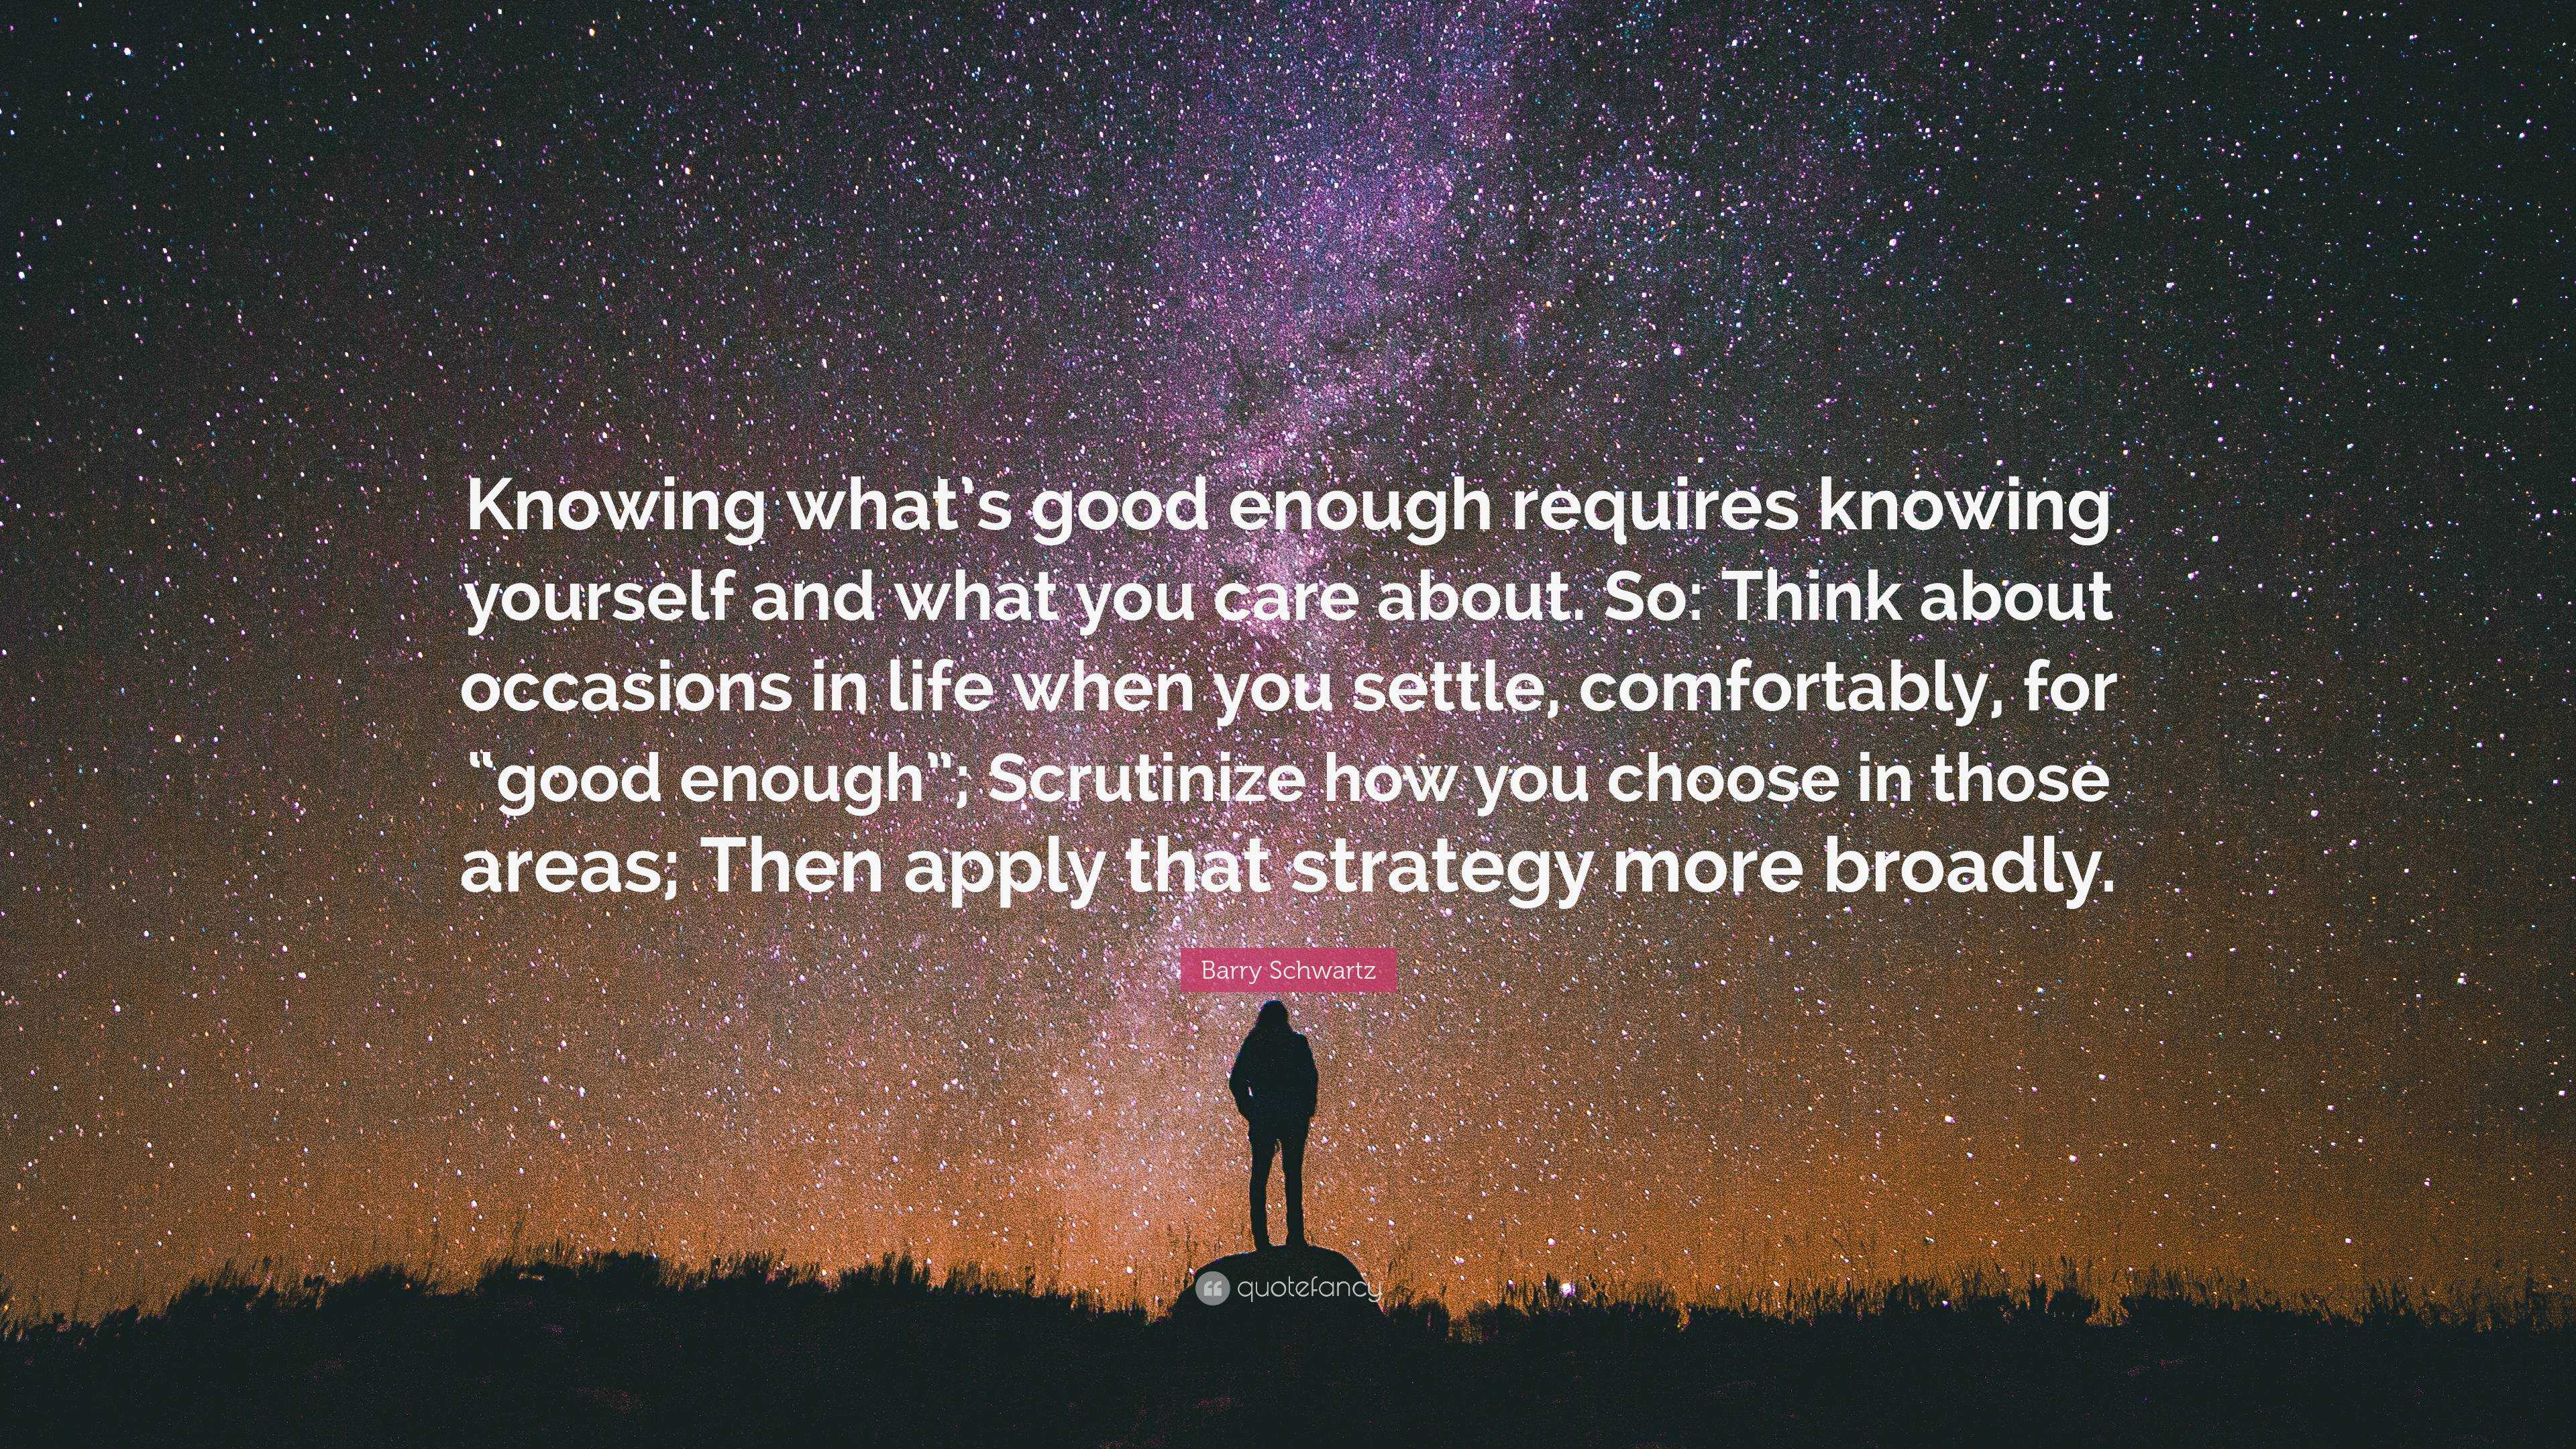 Barry Schwartz Quote Knowing What S Good Enough Requires Knowing Yourself And What You Care About So Think About Occasions In Life When You